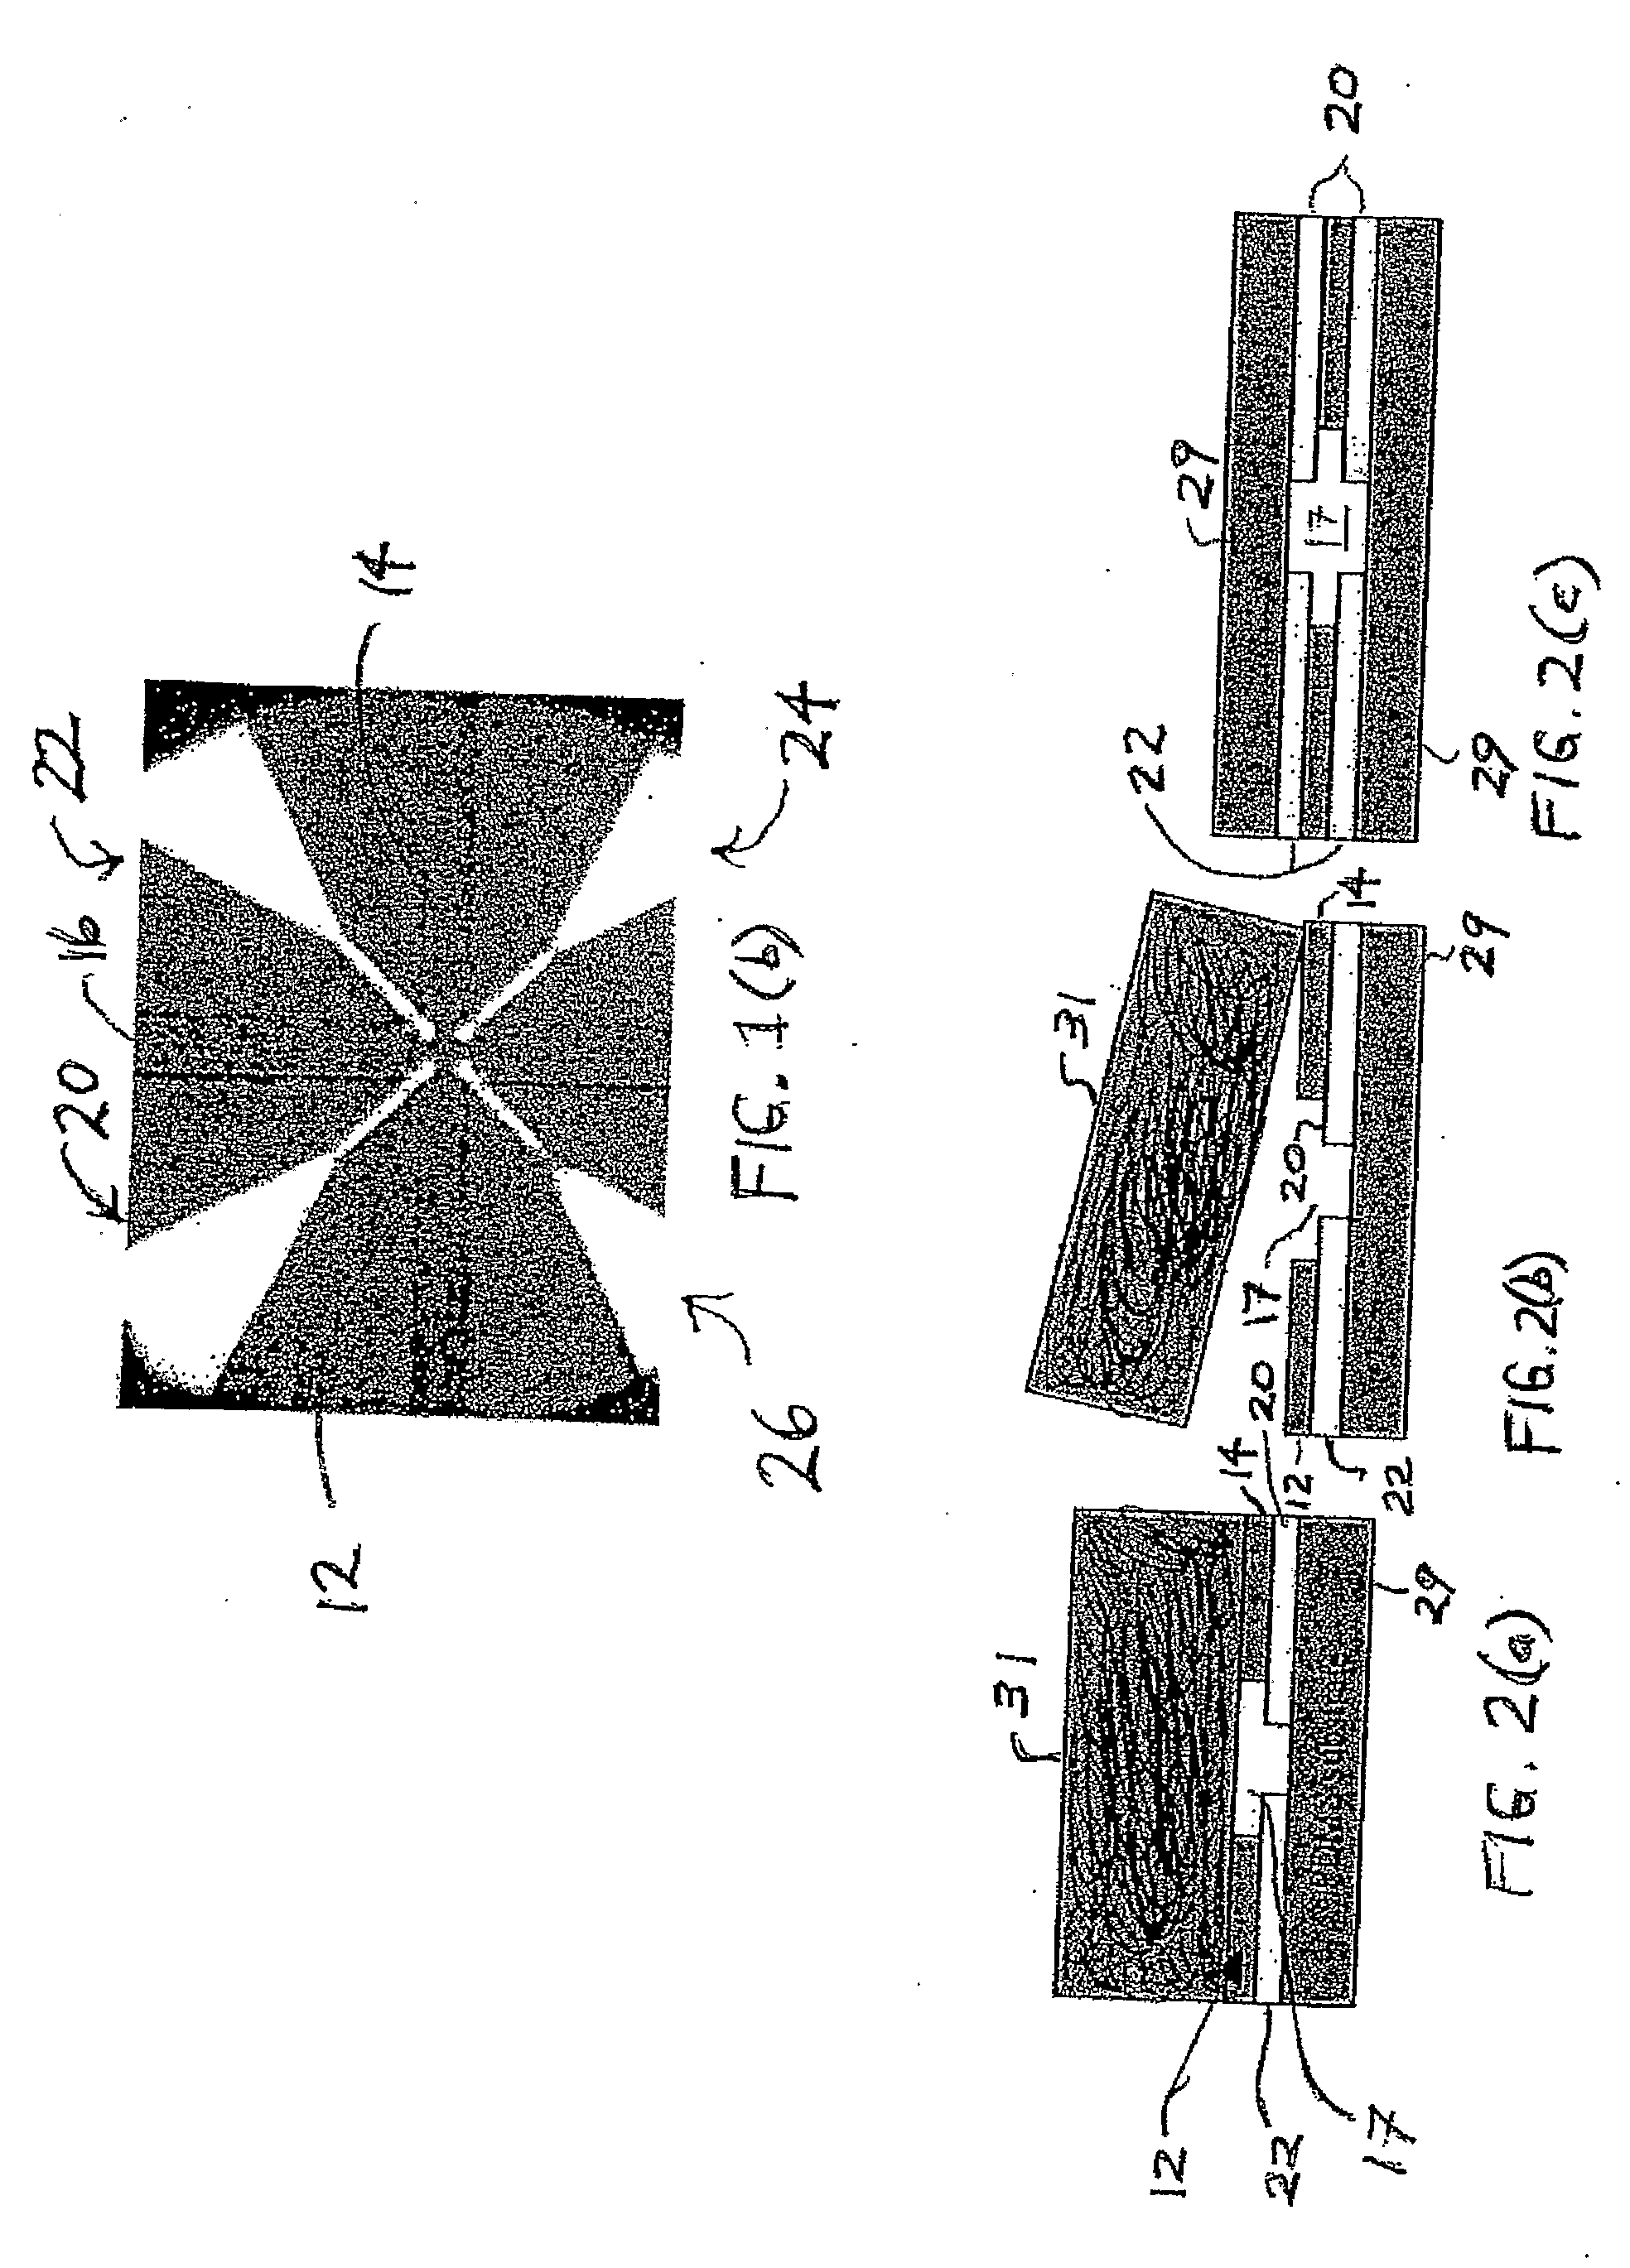 Apparatus and Method for Improved Optical Detection of Particles in Fluid